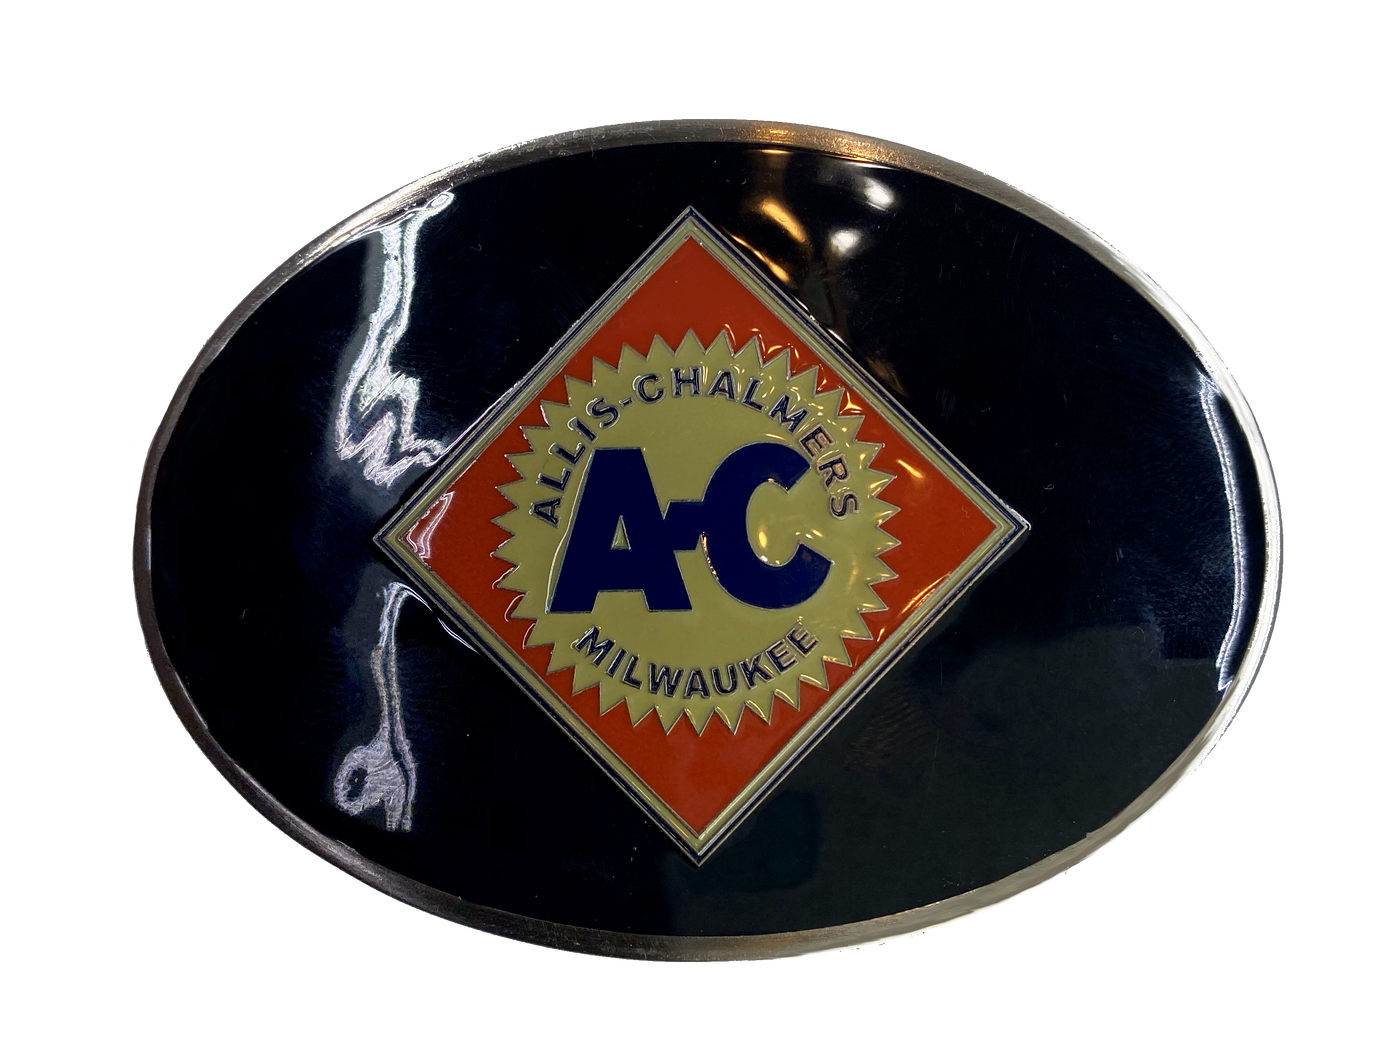 Fully Licensed Black Allis Chalmers Belt Buckle, oval shaped with classic logo in Orange and Beige. Size 3 3/4" wide x 2 3/4" height, Fits up to 1 1/2" wide belts. Available in our shop in Smyrna, TN just outside Nashville as well as from this online store.